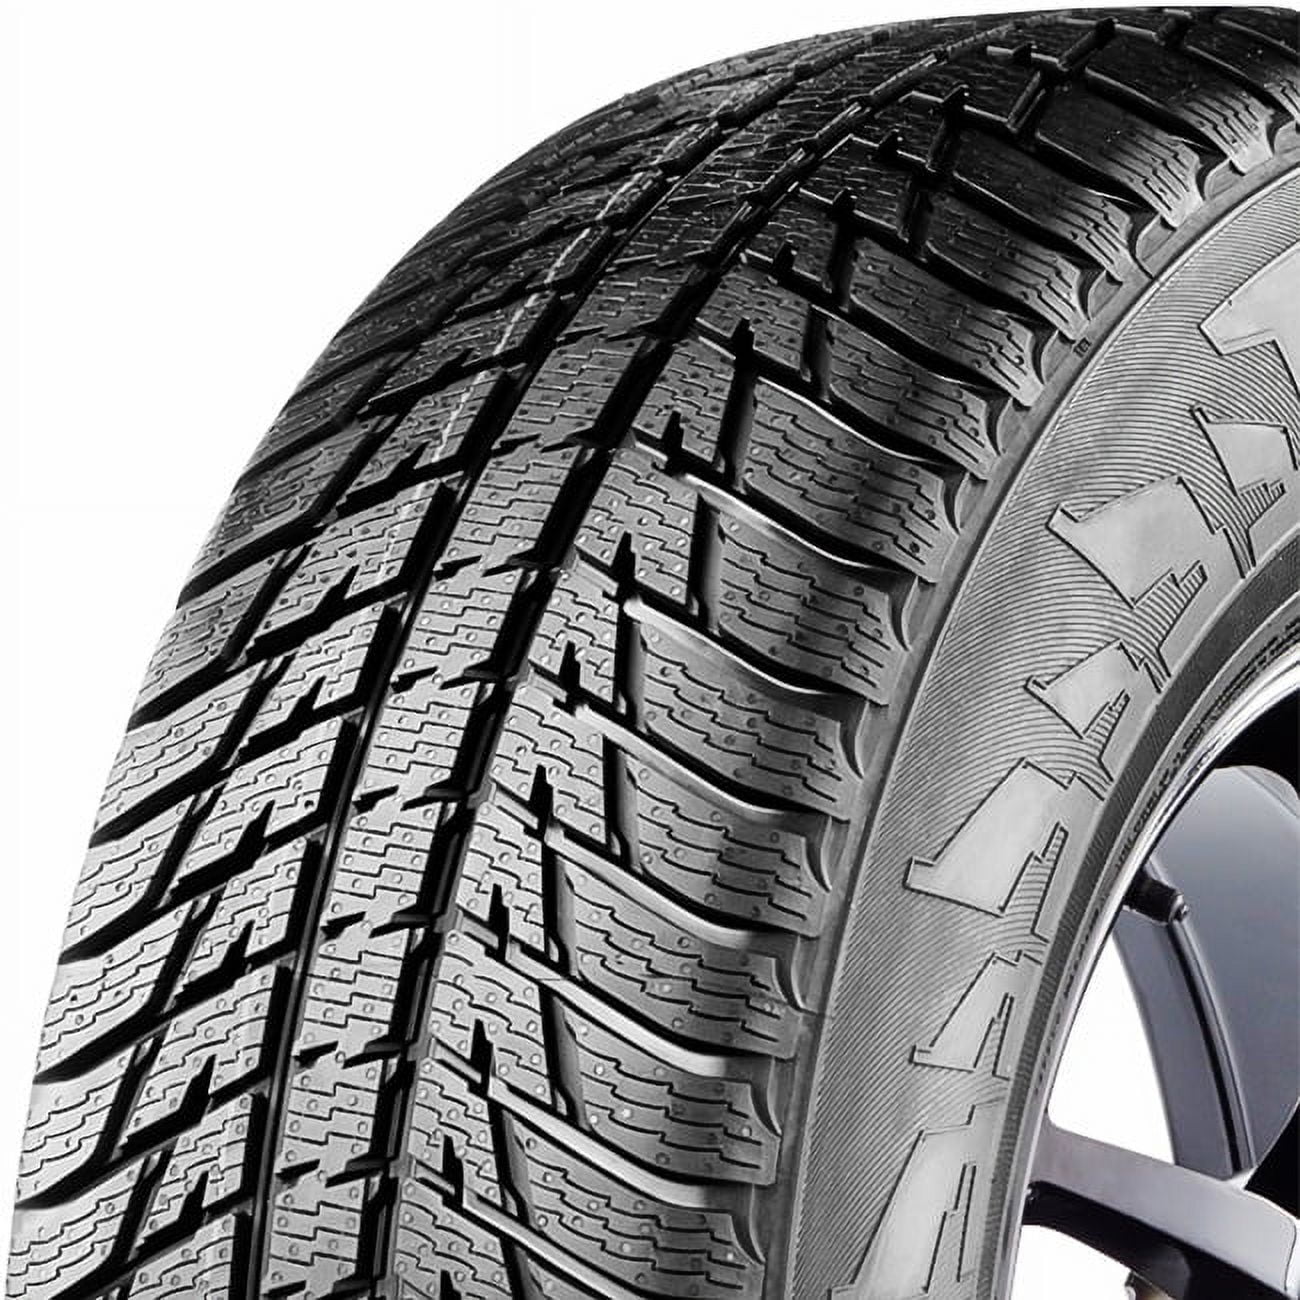 Tire 2017-22 North Nokian SUV Fits: H 102 215/65R16 Subaru 2009-13 Forester Renegade X, Jeep WRG3